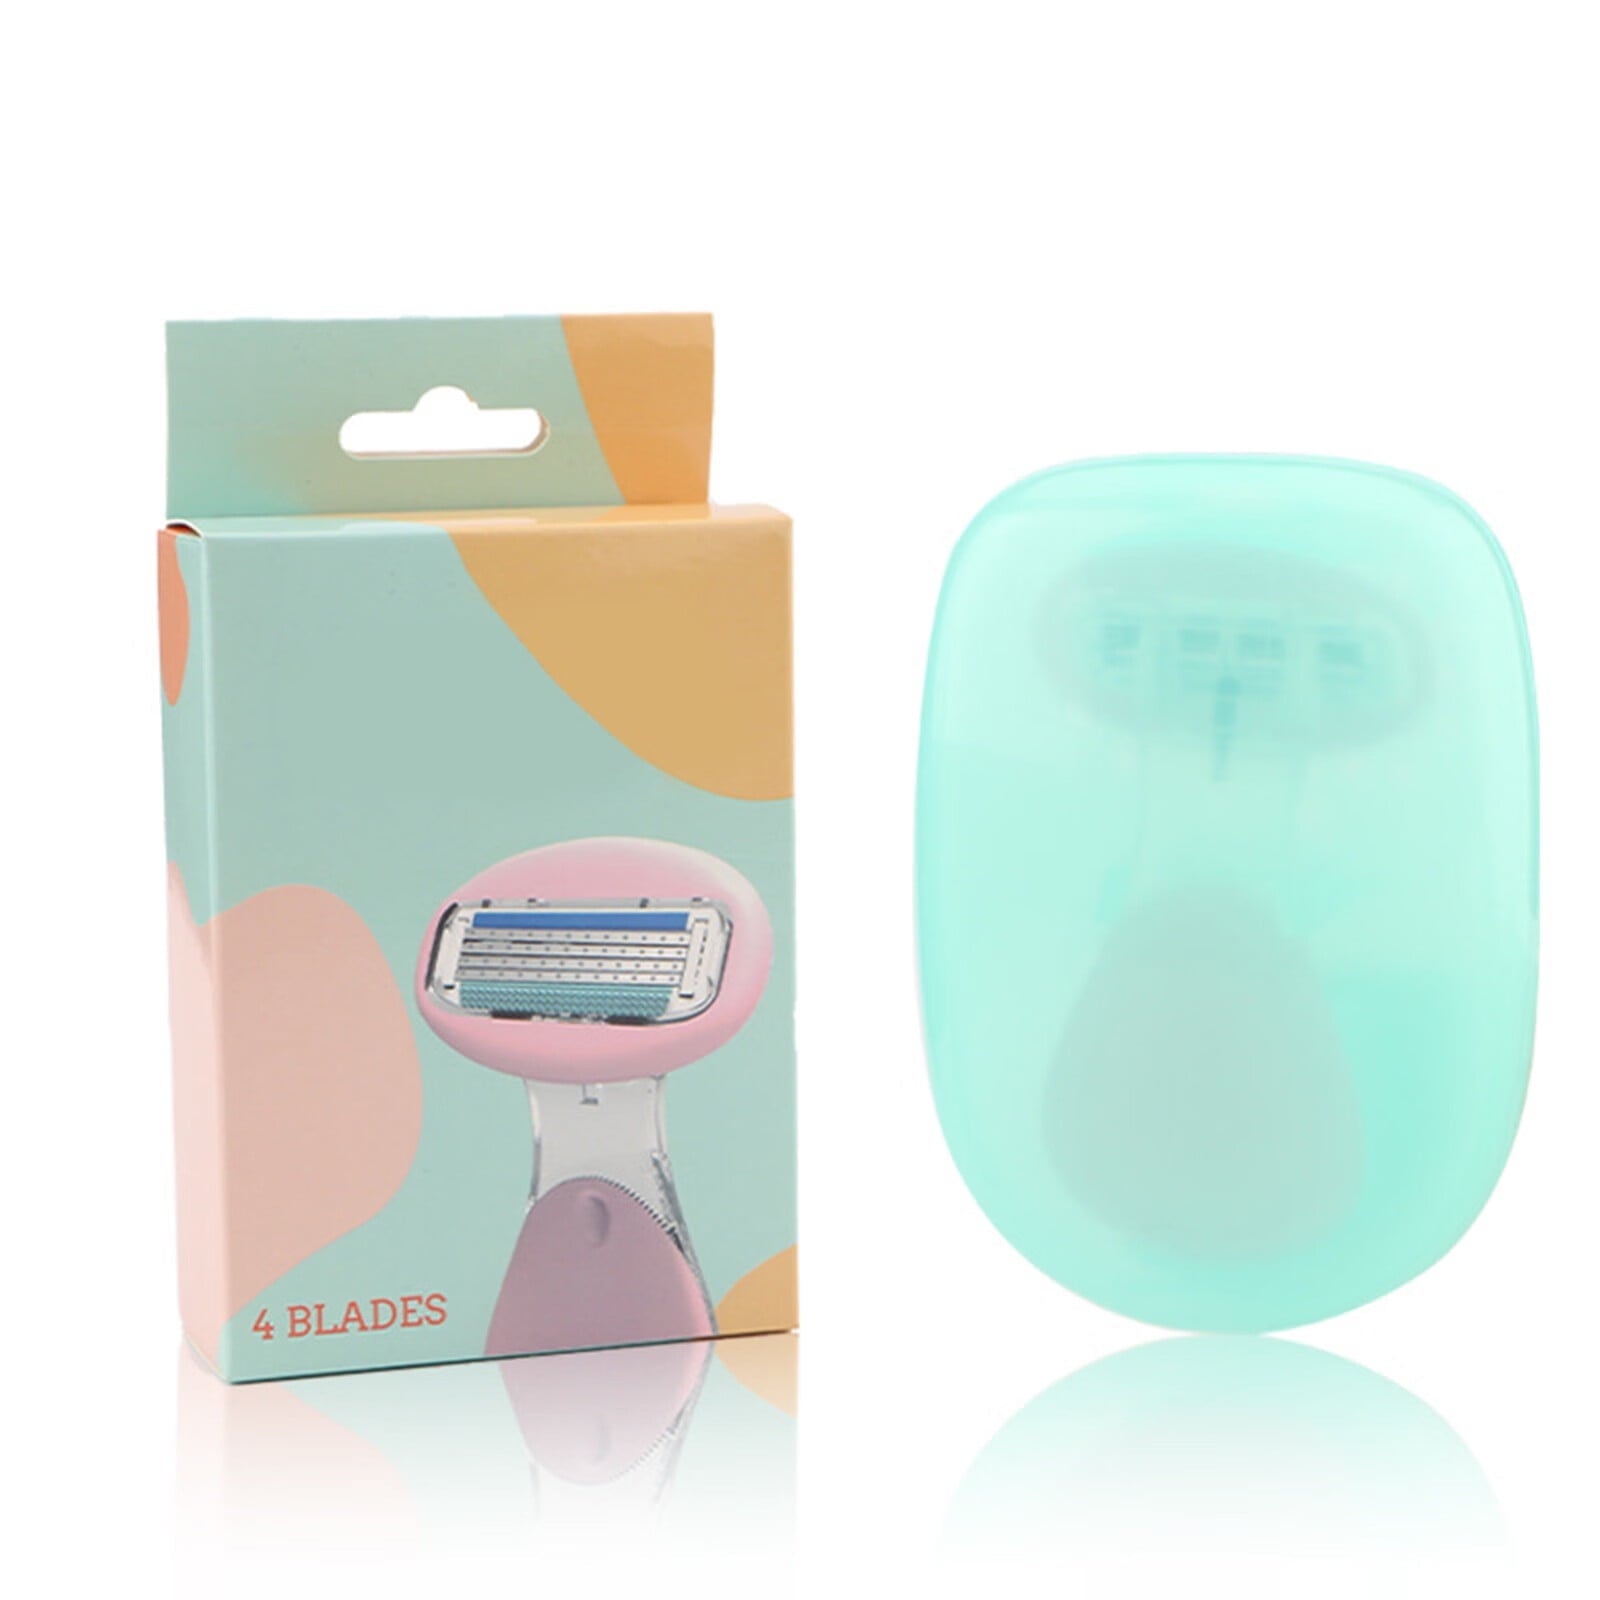 Wholesale prices with free shipping all over United States Randolph 4 Lady Safty Mini Face Shaving With PP Box Gift For Women Men Women Personal Care Triple ABS+TPR - Steven Deals